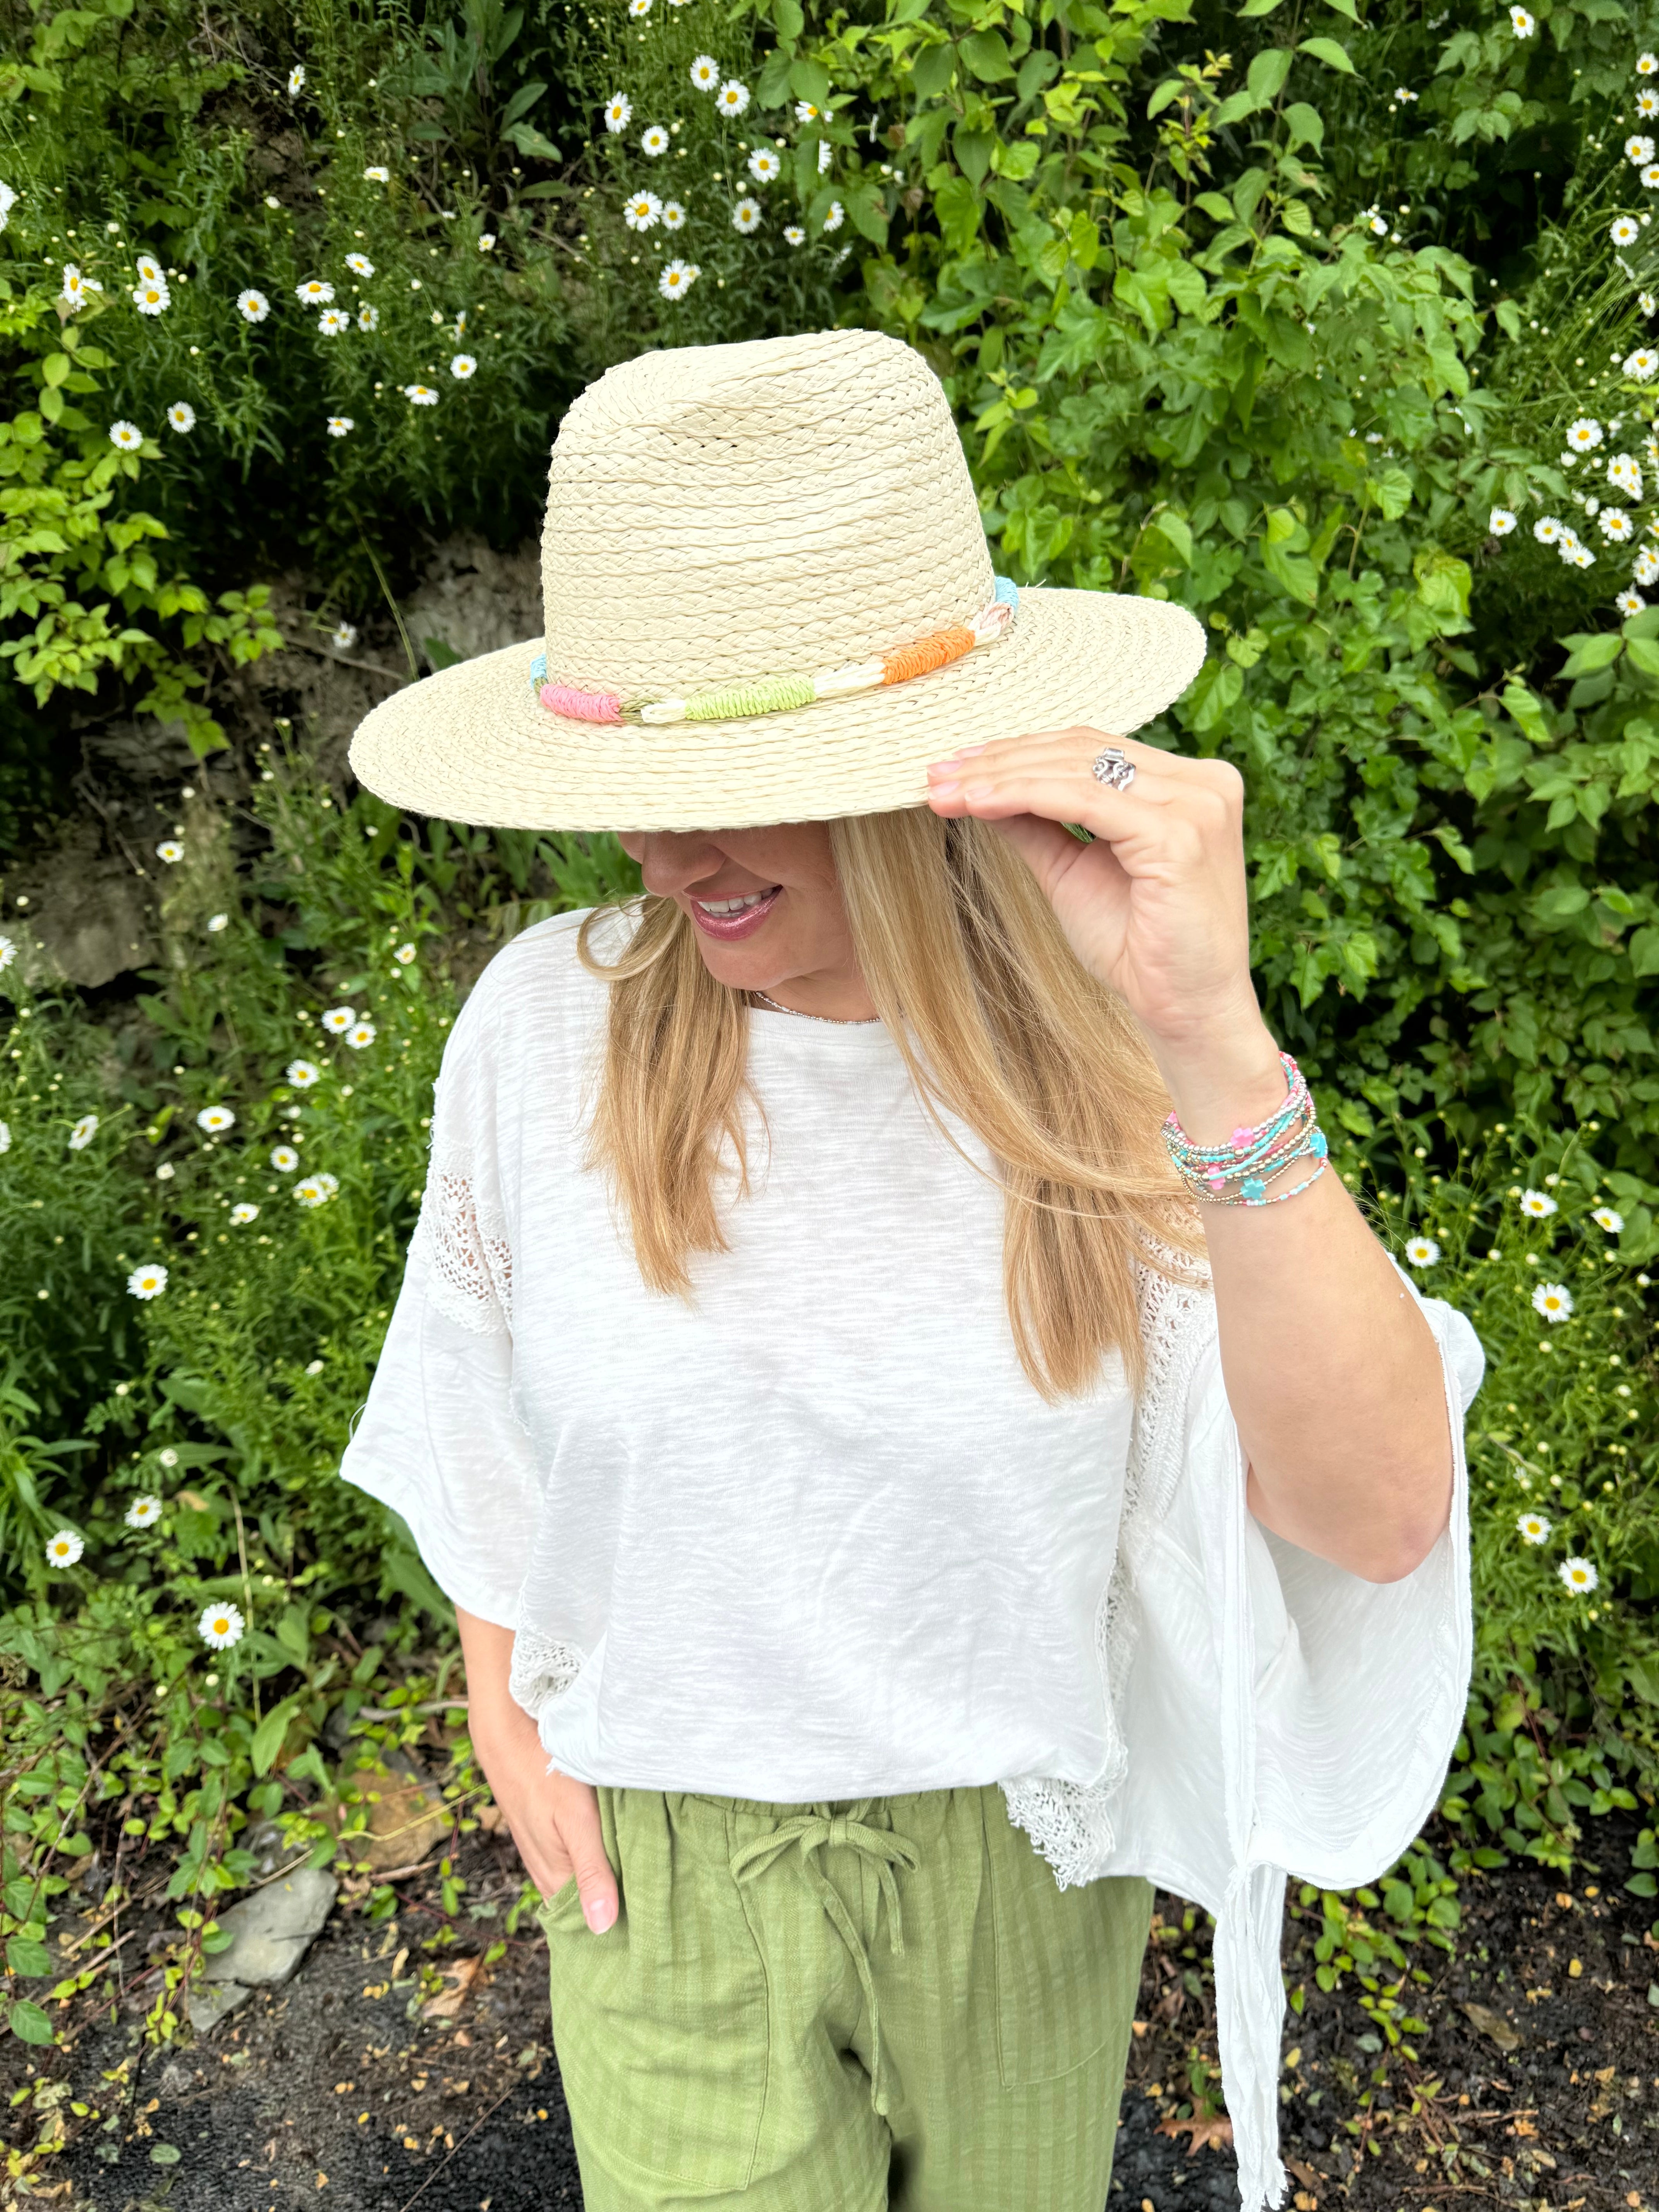 Summer Fun Straw Hat-300 Headwear-The Lovely Closet-The Lovely Closet, Women's Fashion Boutique in Alexandria, KY